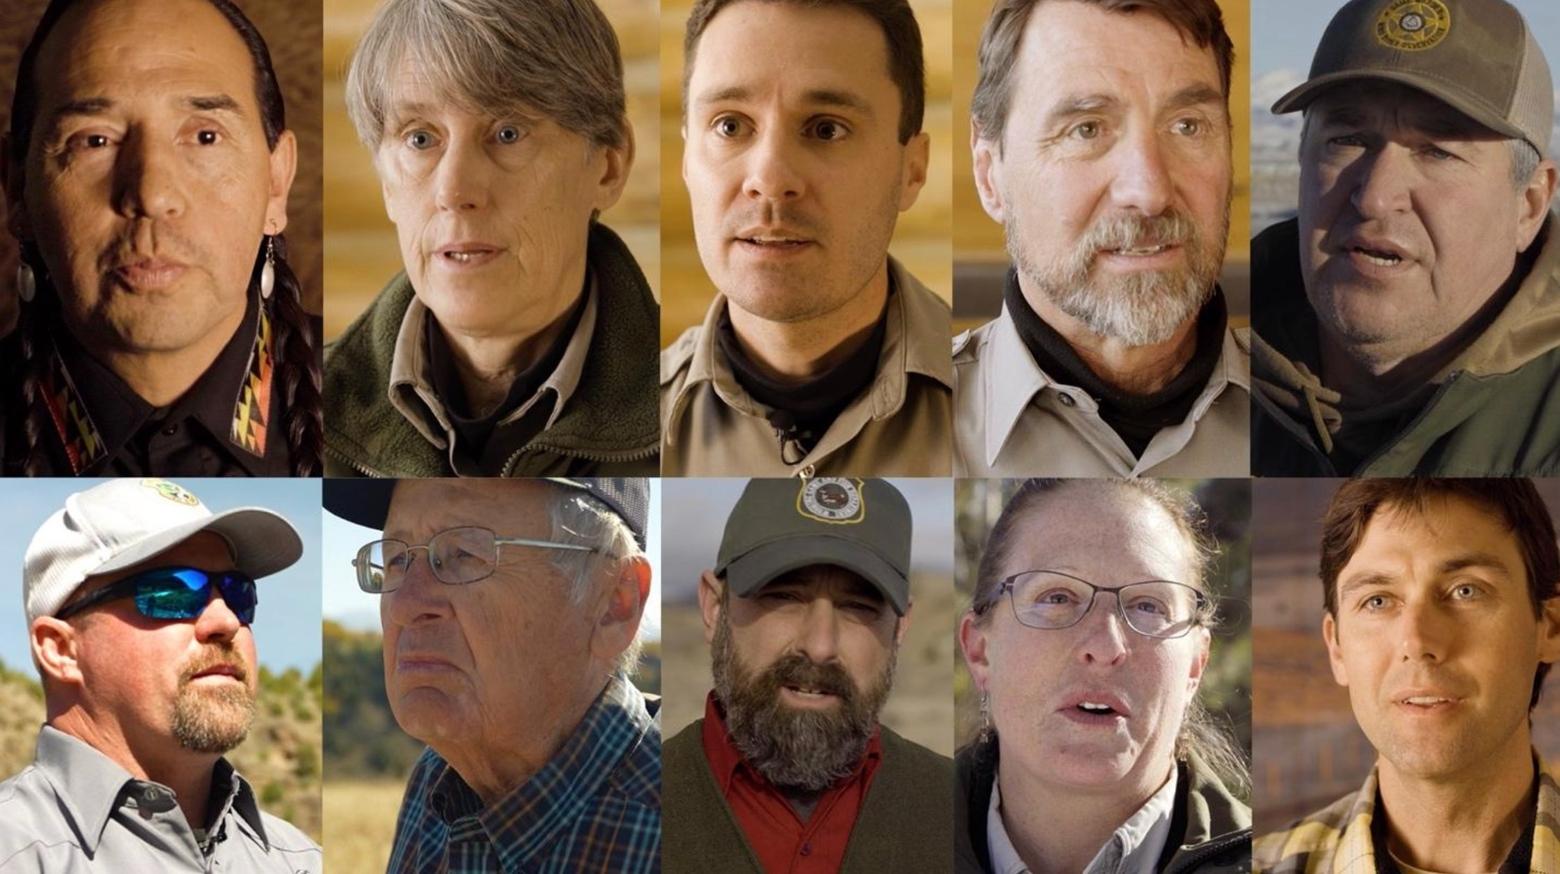 Featured experts in the film include: (upper row from left to right) George Abeyta, Eastern Shoshone Educator; Sarah Dewey, Justin Schwabedissen, and Superintendent Chip Jenkins with Grand Teton National Park; Art Lawson, Shoshone and Arapaho Tribes Fish and Game; (lower row left to right) Josh Rydalch, Idaho Department of Fish and Game; Clen Atchley, Flying A Ranch, Lamont, Idaho; Tony Mong and Jill Randall, Wyoming Game and Fish Department; and Max Ludington, Jackson Hole Land Trust.